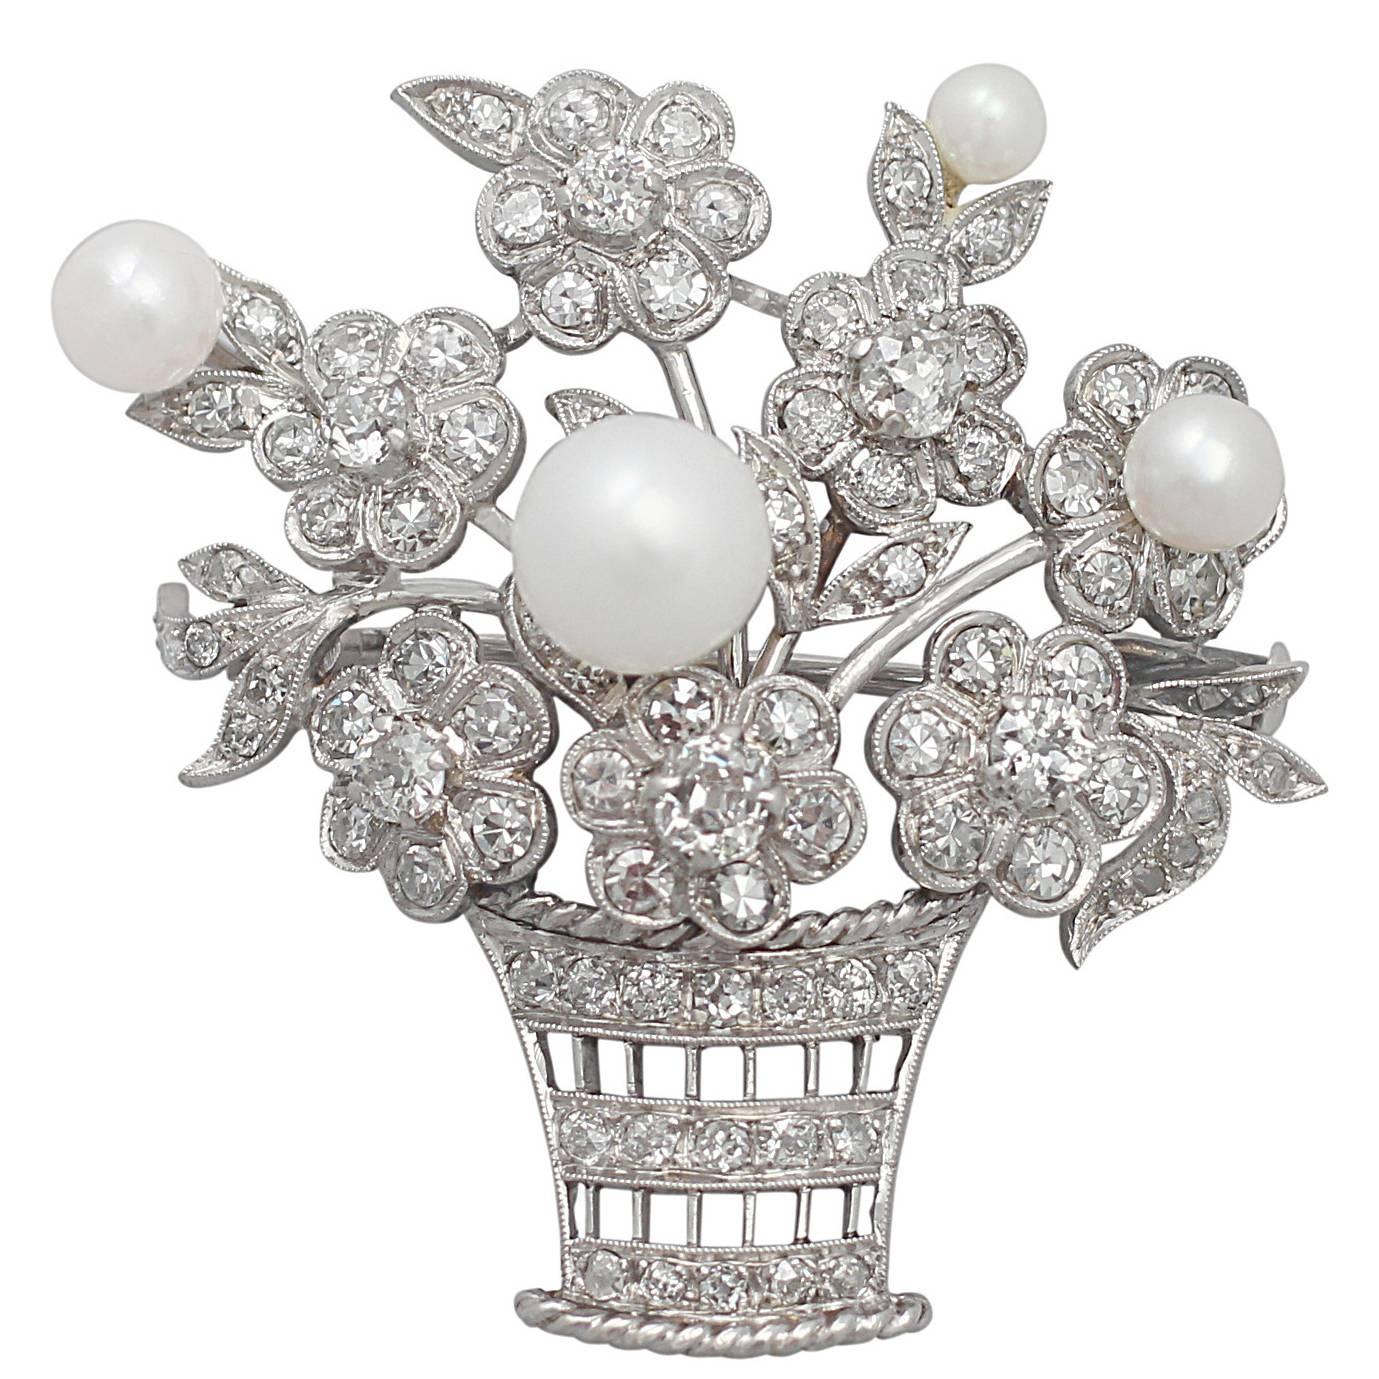 2.81Ct Diamond and Pearl, 14k White Gold Brooch - Antique Circa 1900